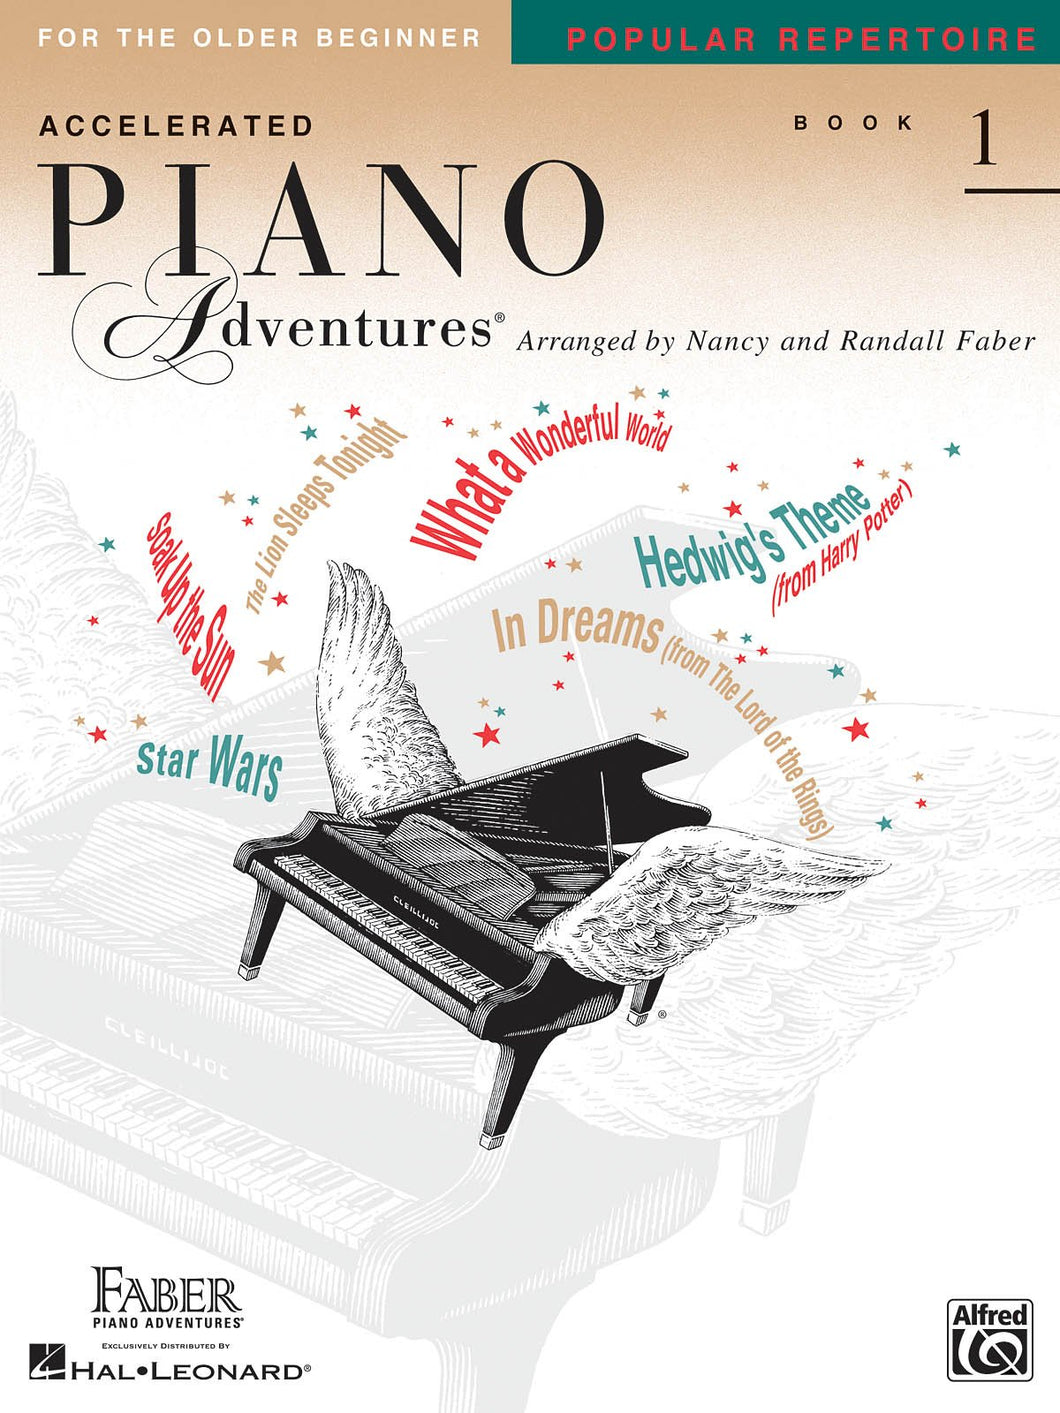 Faber Accelerated Piano Adventures for the Older Beginner Popular Repertoire 1